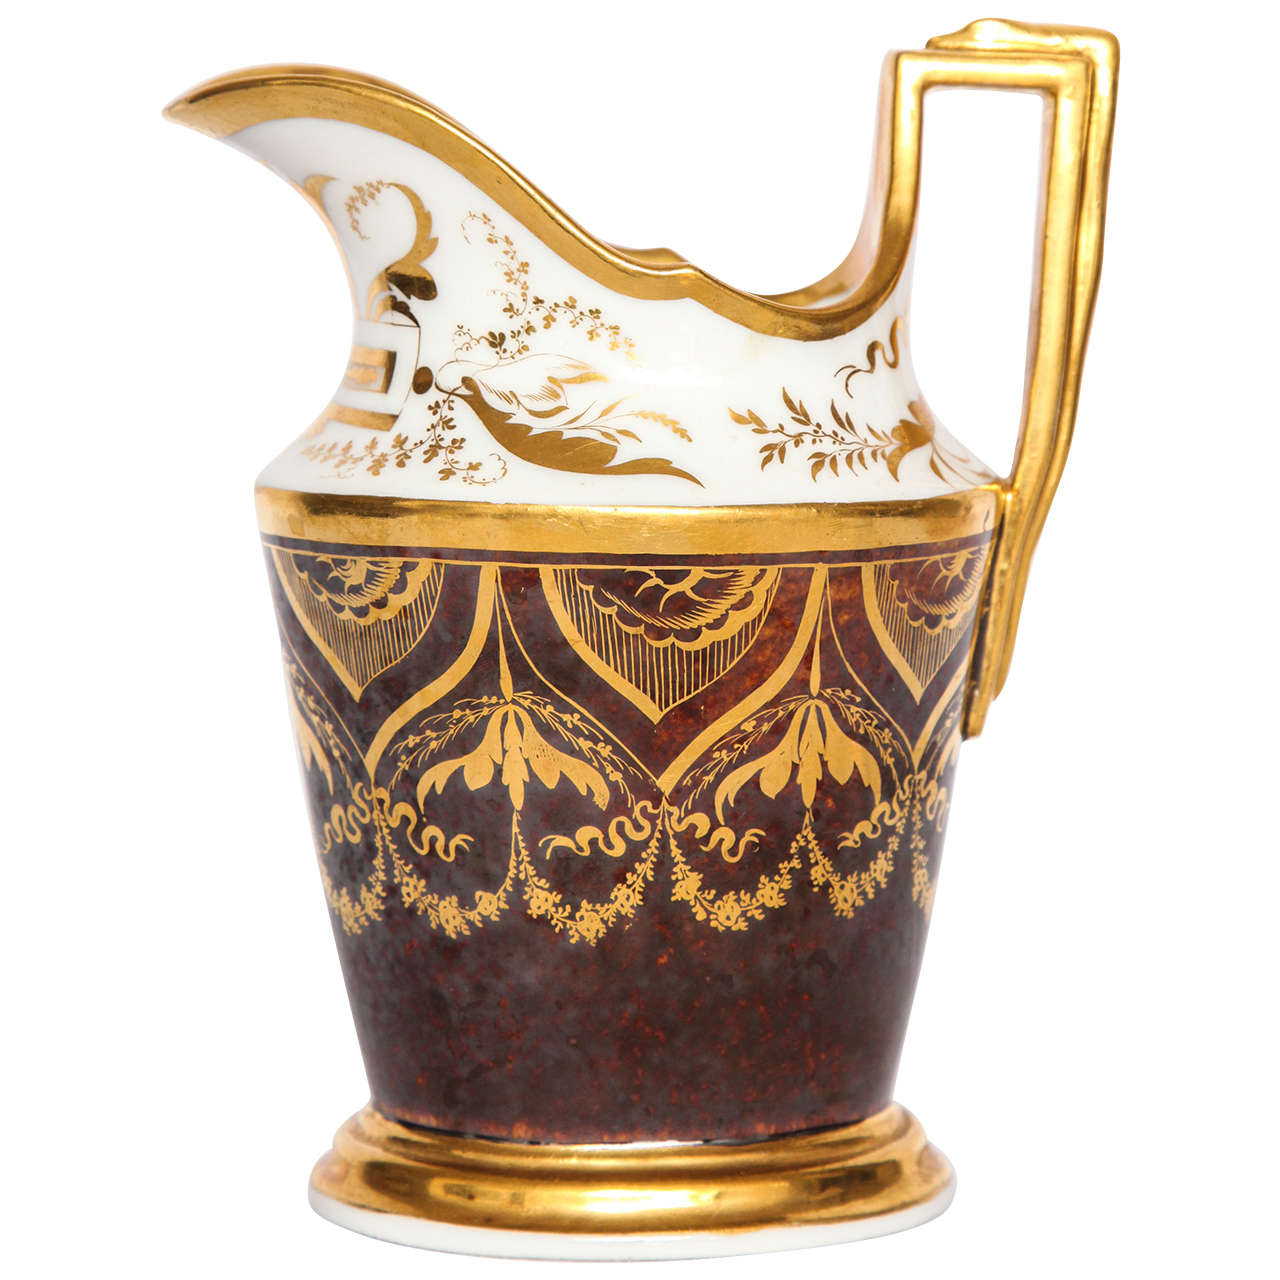 French gilt and painted porcelain pitcher. Fine Empire period gilt painted milk pitcher with rich mocha brown ground and neoclassical gilt garlands and floral swags. Markings for Darte Frères Paris. France, circa 1810. 
Dimensions: 6.75